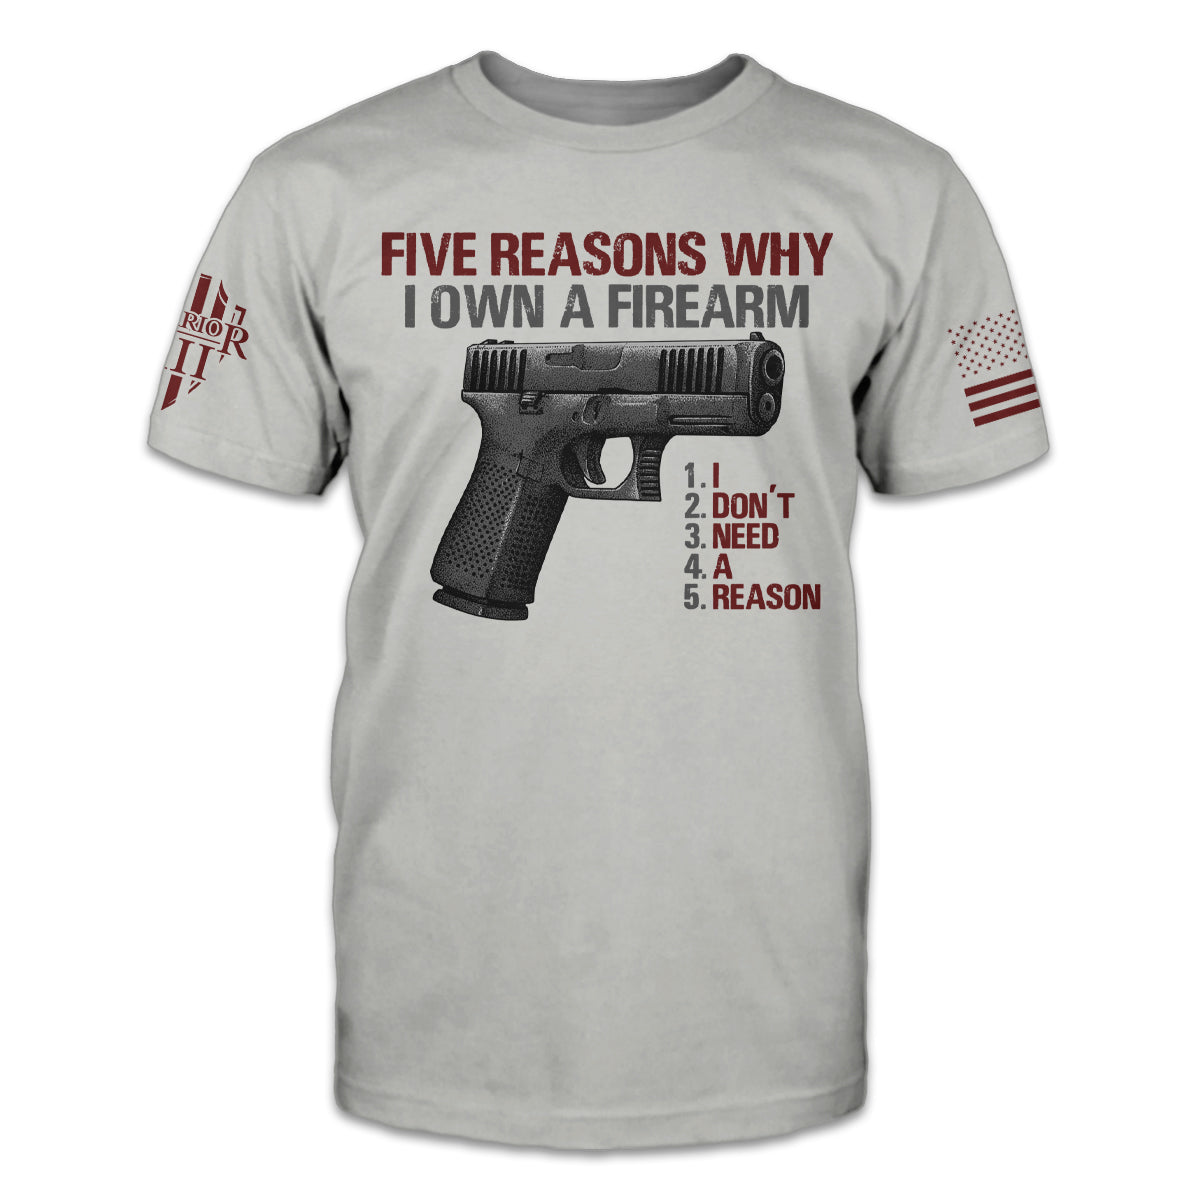 Front & back black t-shirt with the words "Five reasons why I own a firearm. I Don't Need A Reason" with a gun printed on the shirt.